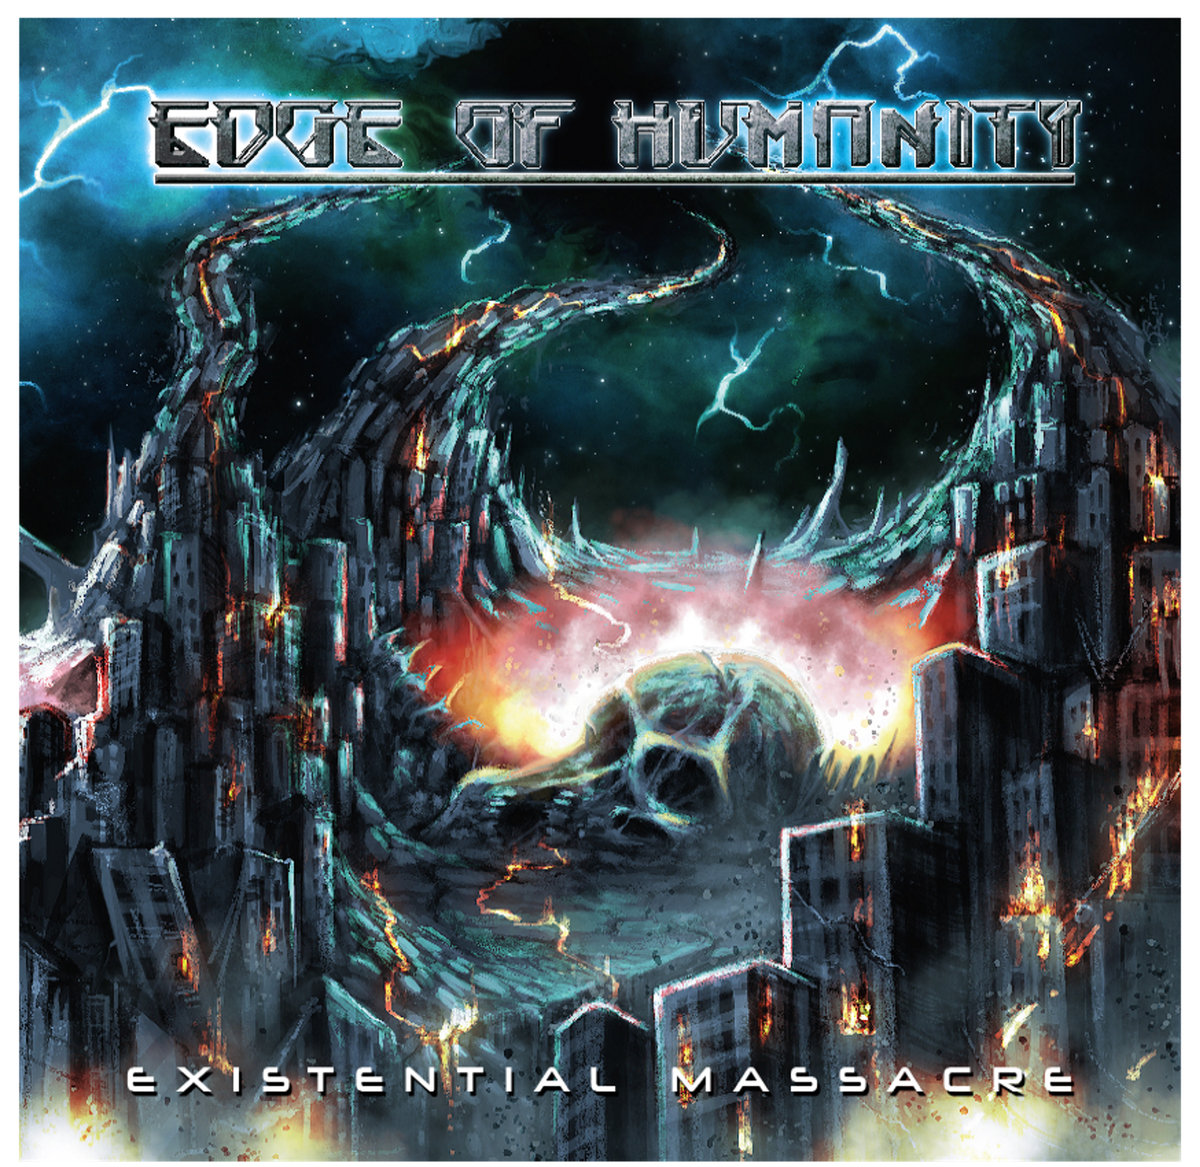 EDGE OF HUMANITY - Existential Massacre cover 